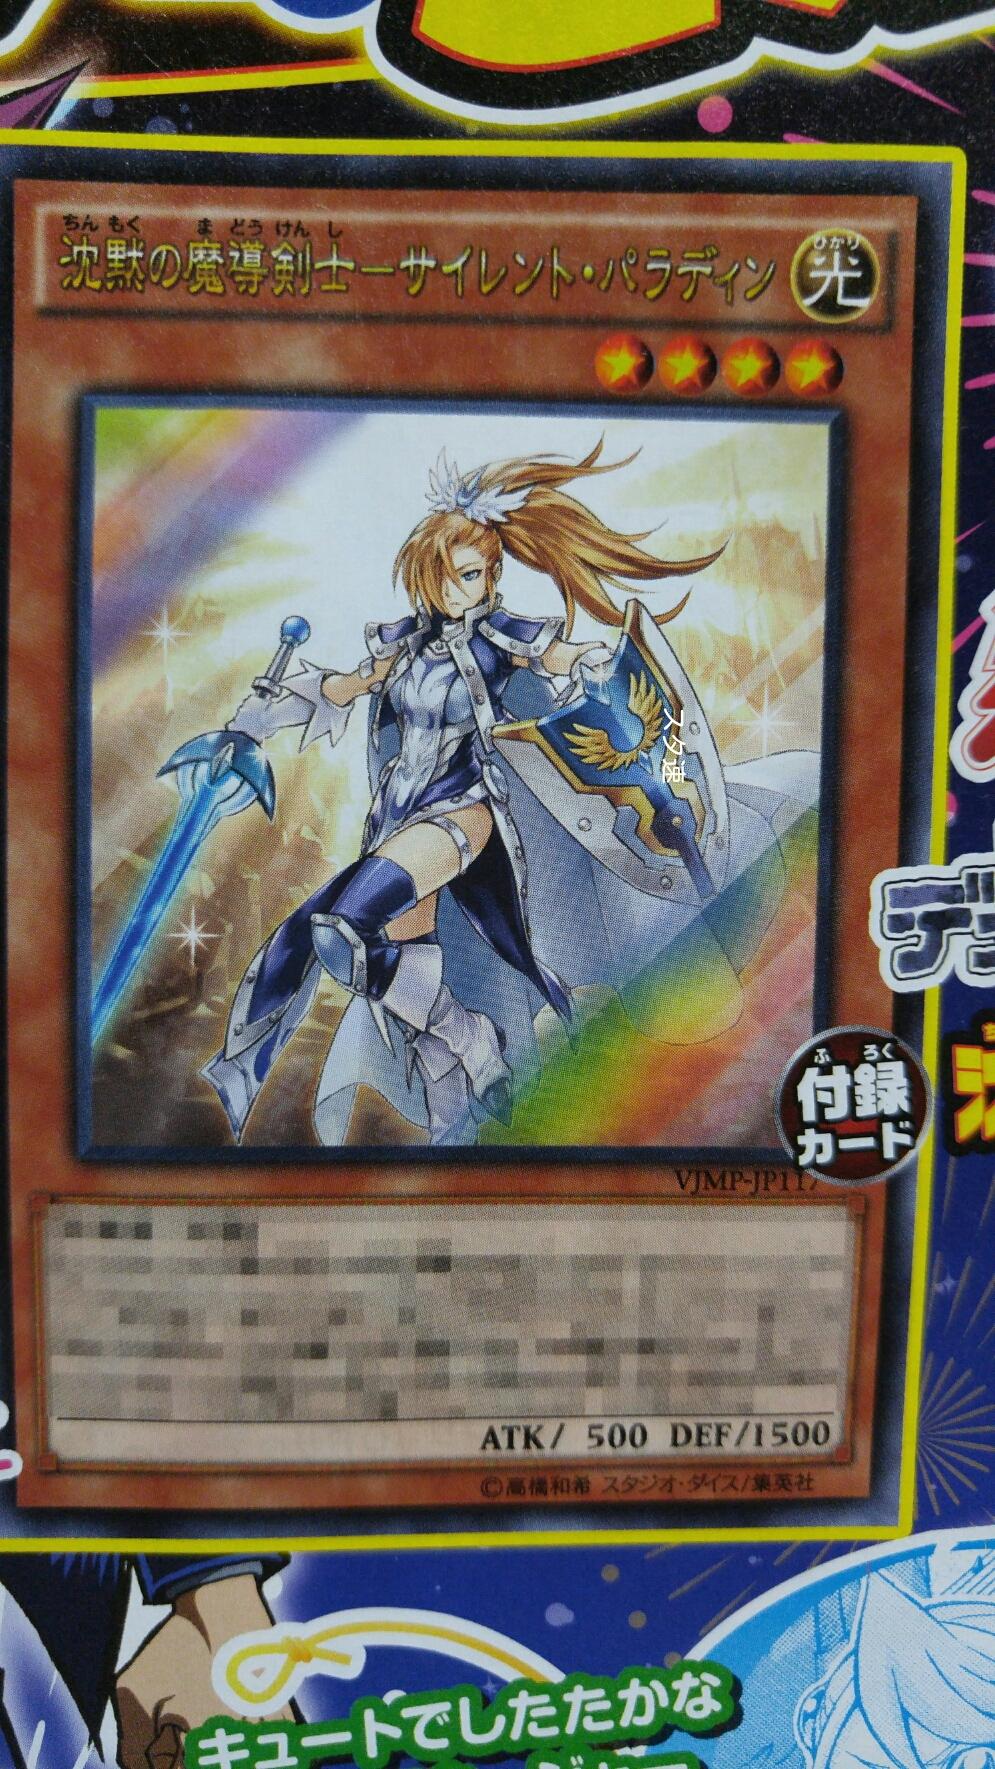 Yu-Gi-Oh! Saikyou Card Battle - more scans, new gameplay info | The ...